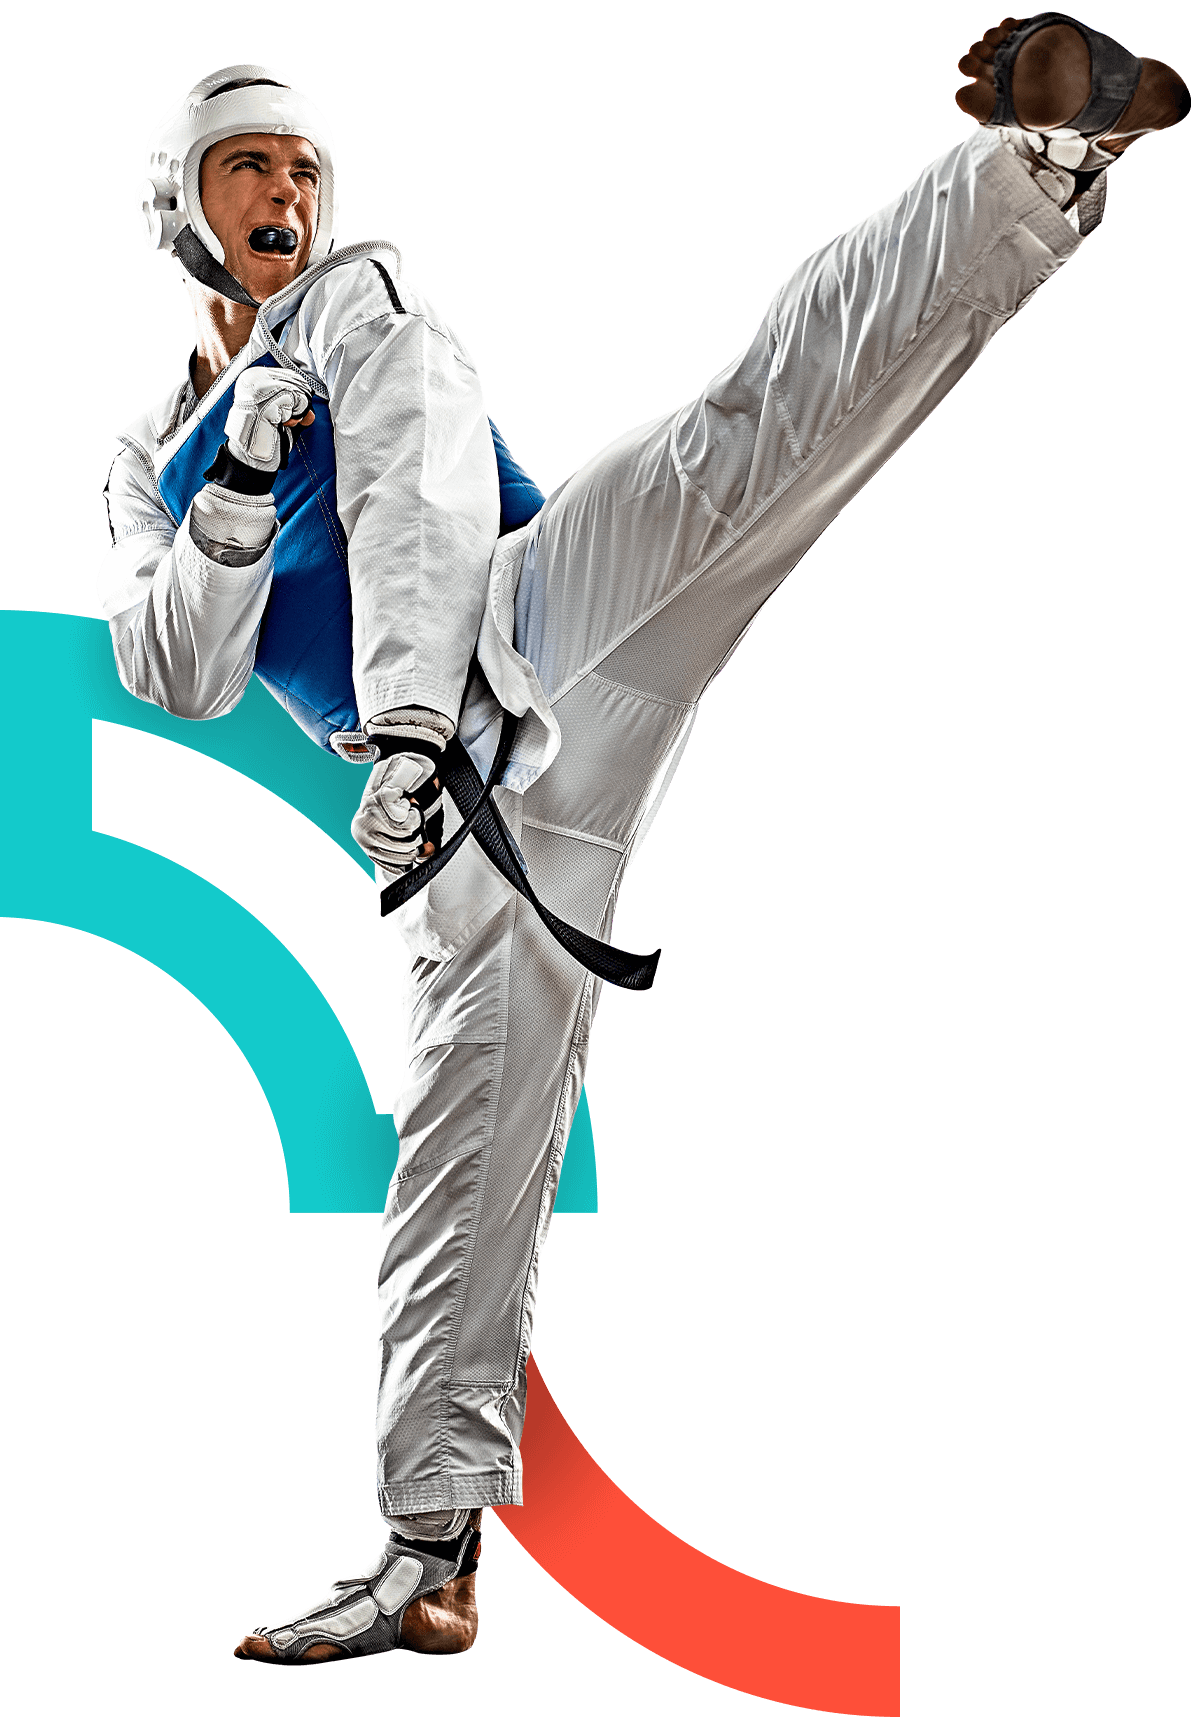 In the picture, a male taekwondo athlete making a high kick.